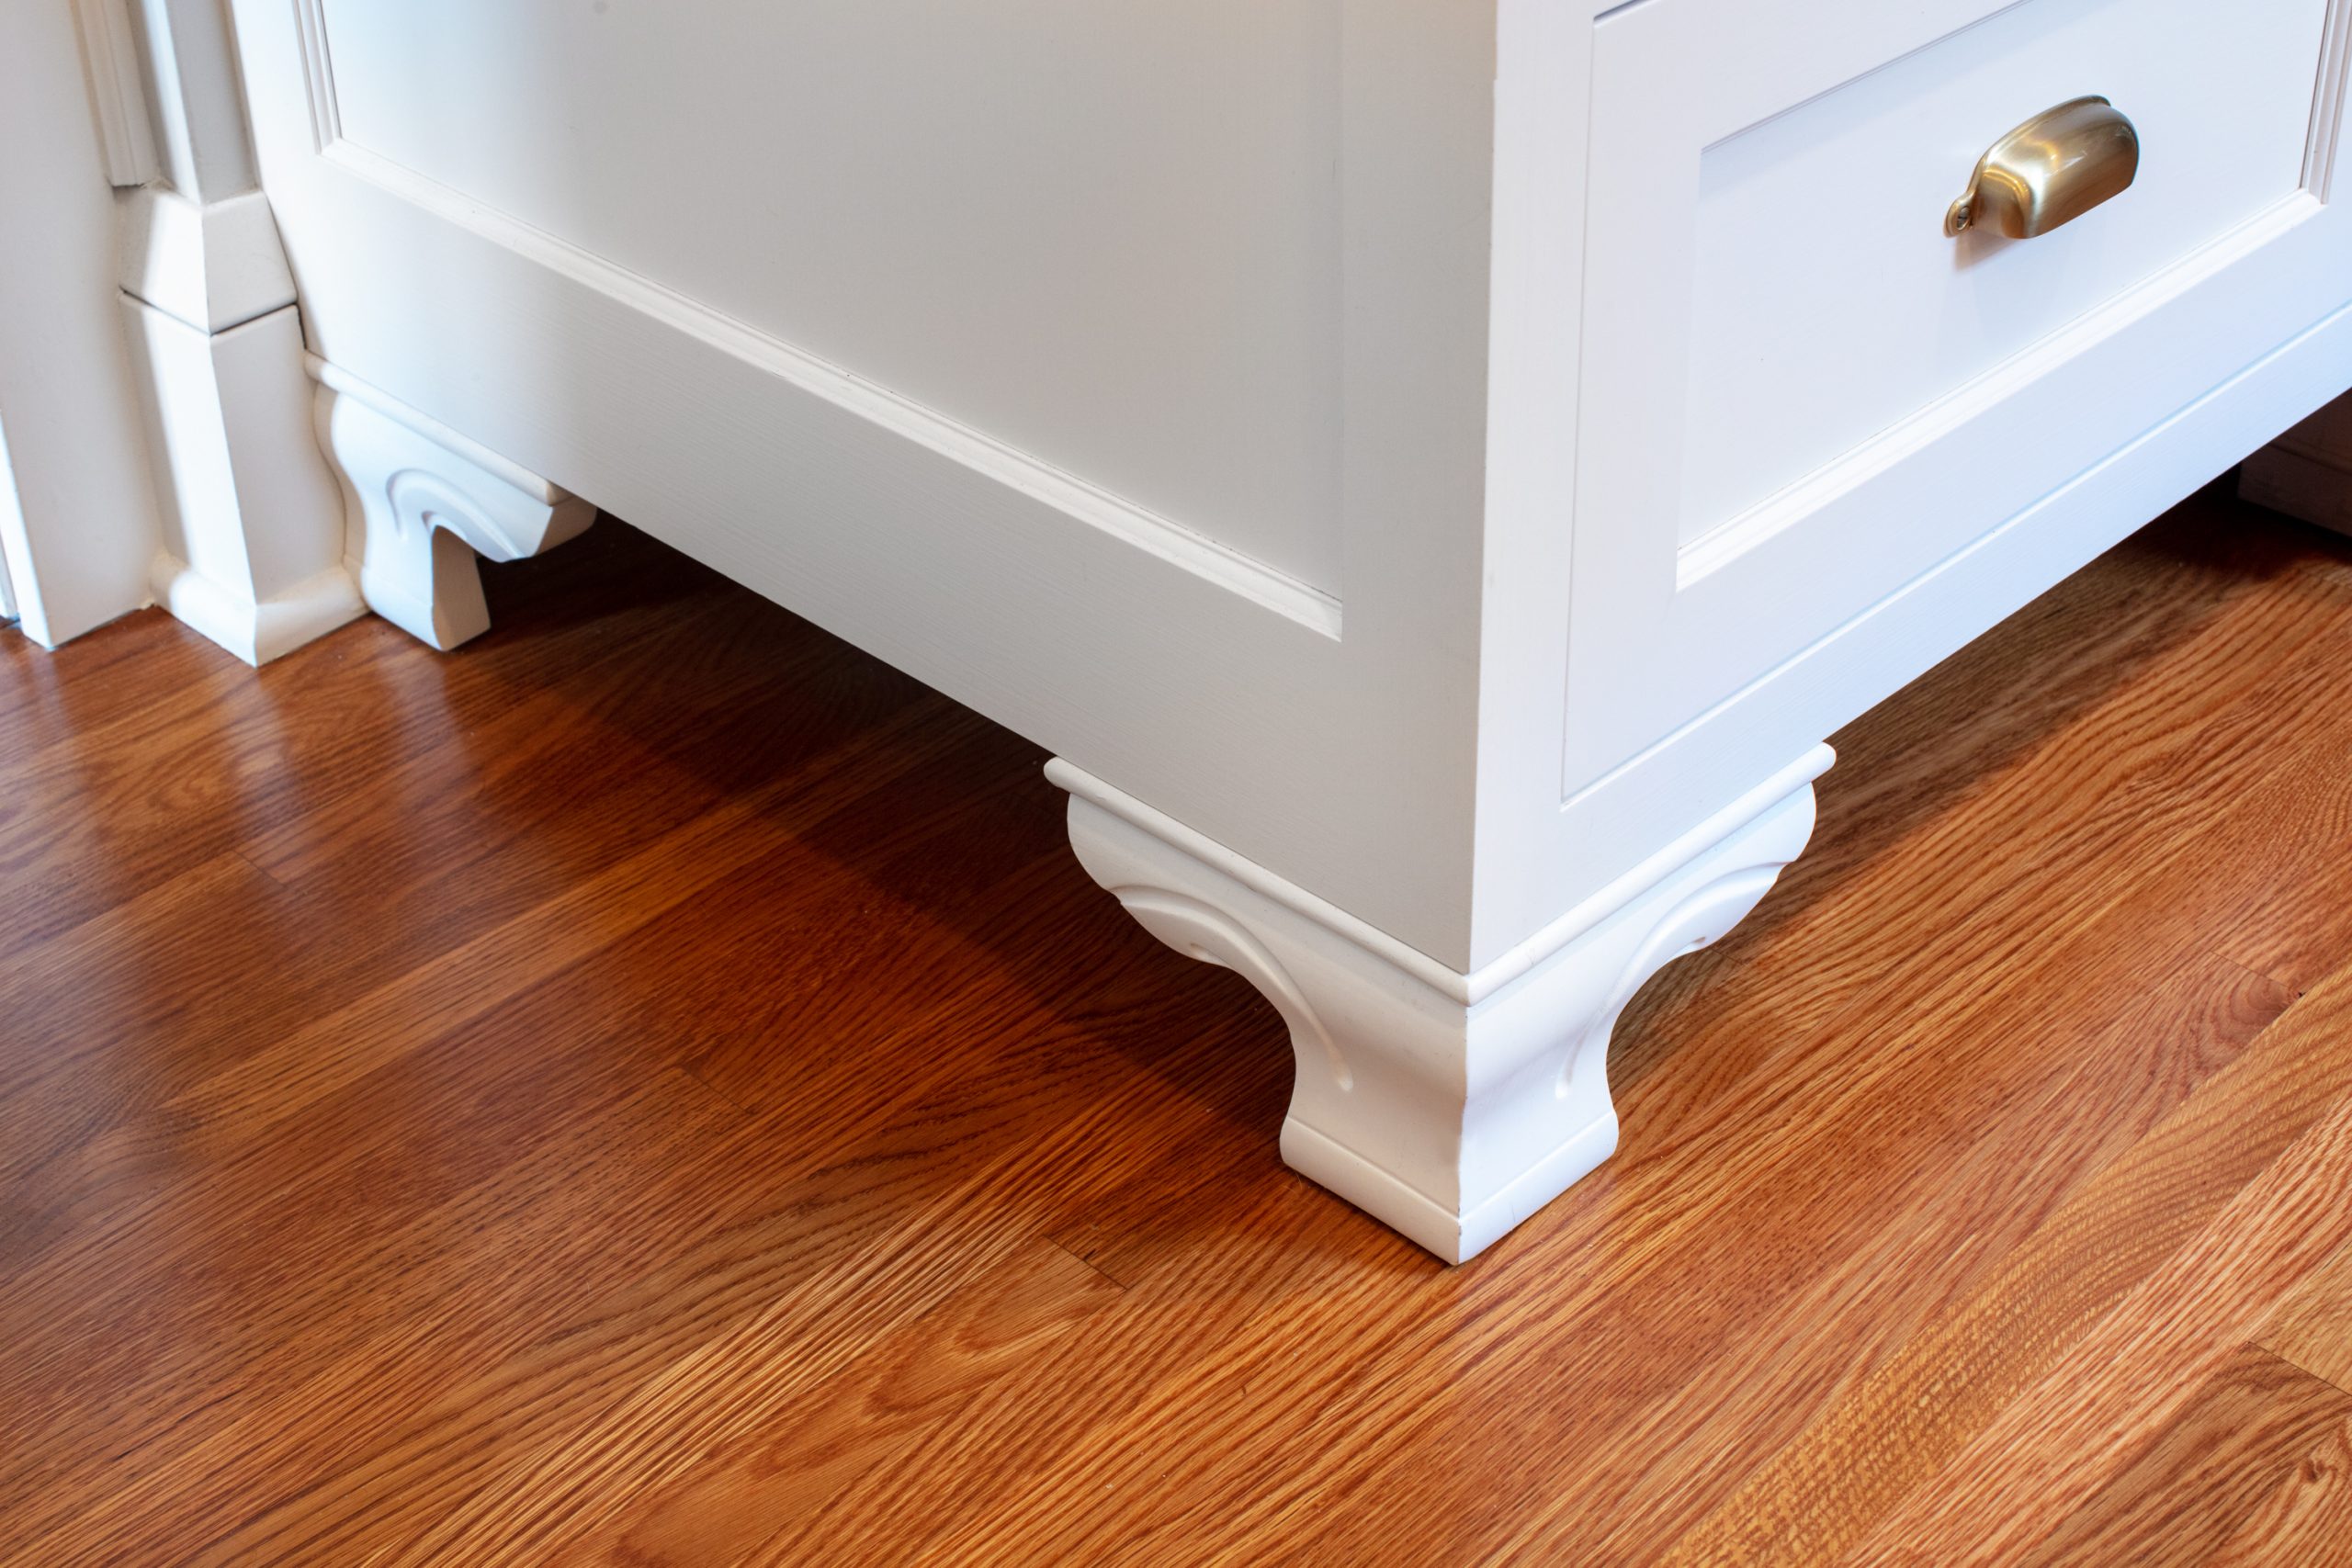 Cabinet foot detail